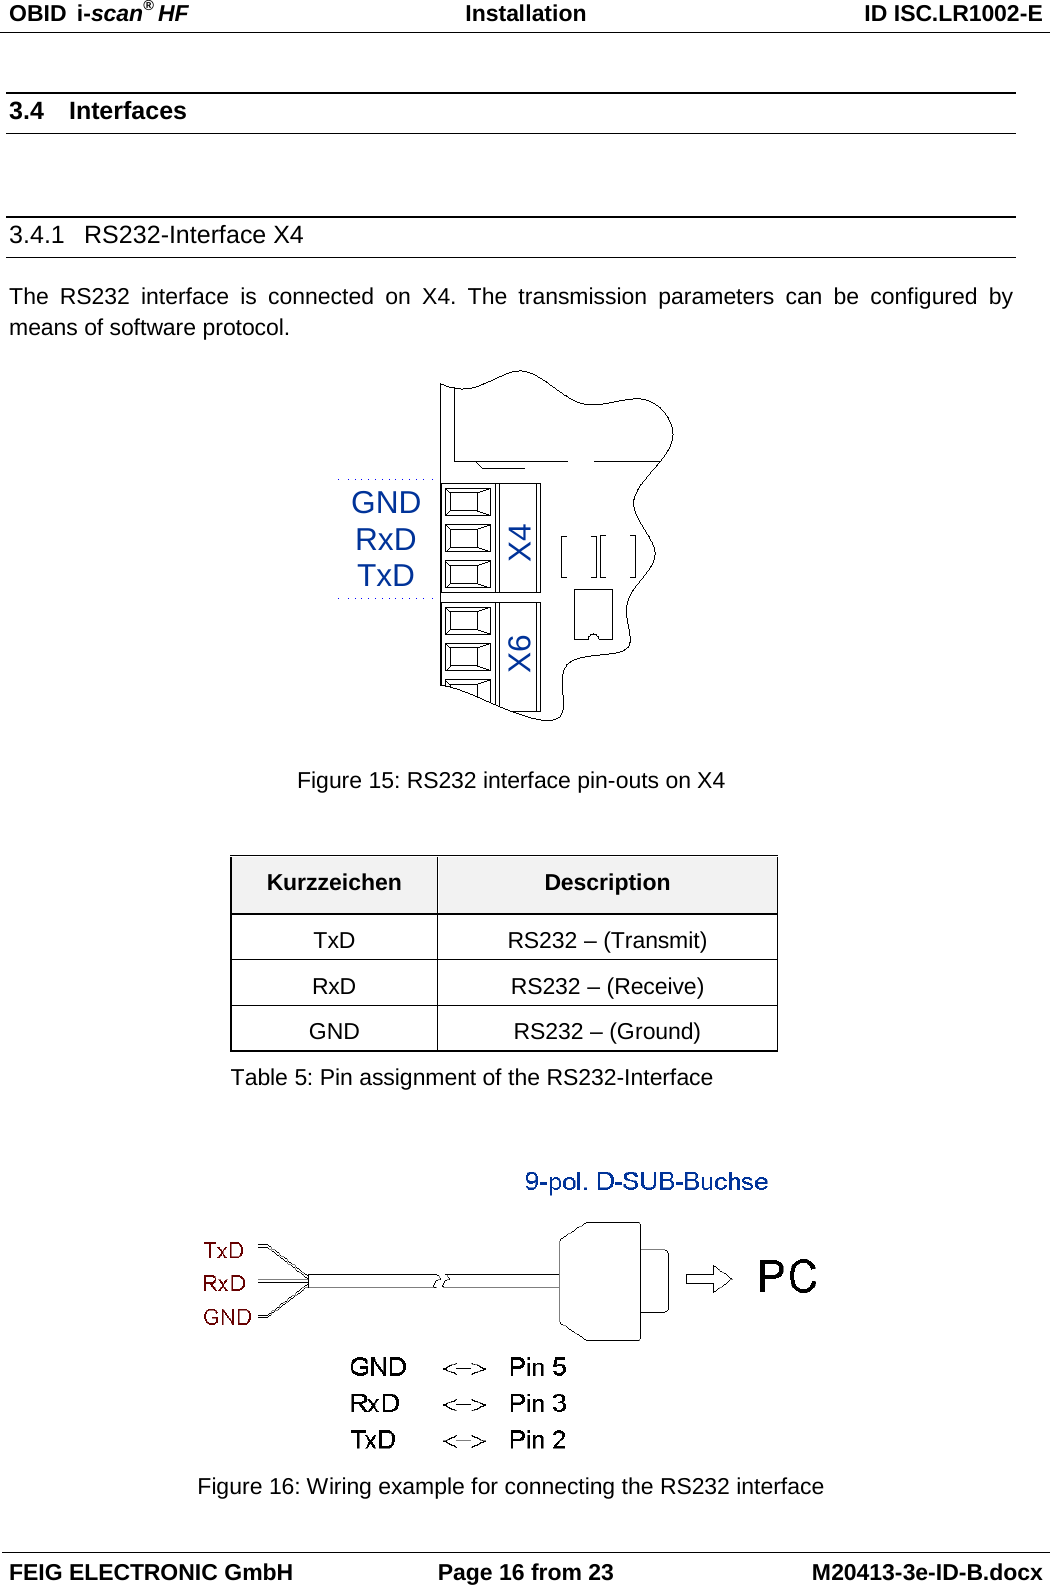 OBID  i-scan® HF Installation ID ISC.LR1002-E  FEIG ELECTRONIC GmbH Page 16 from 23 M20413-3e-ID-B.docx  3.4 Interfaces  3.4.1 RS232-Interface X4 The RS232 interface is connected on X4. The transmission parameters can be configured by means of software protocol. TxDRxDGNDX4X6 Figure 15: RS232 interface pin-outs on X4  Kurzzeichen Description TxD RS232 – (Transmit) RxD RS232 – (Receive) GND RS232 – (Ground) Table 5: Pin assignment of the RS232-Interface   Figure 16: Wiring example for connecting the RS232 interface 